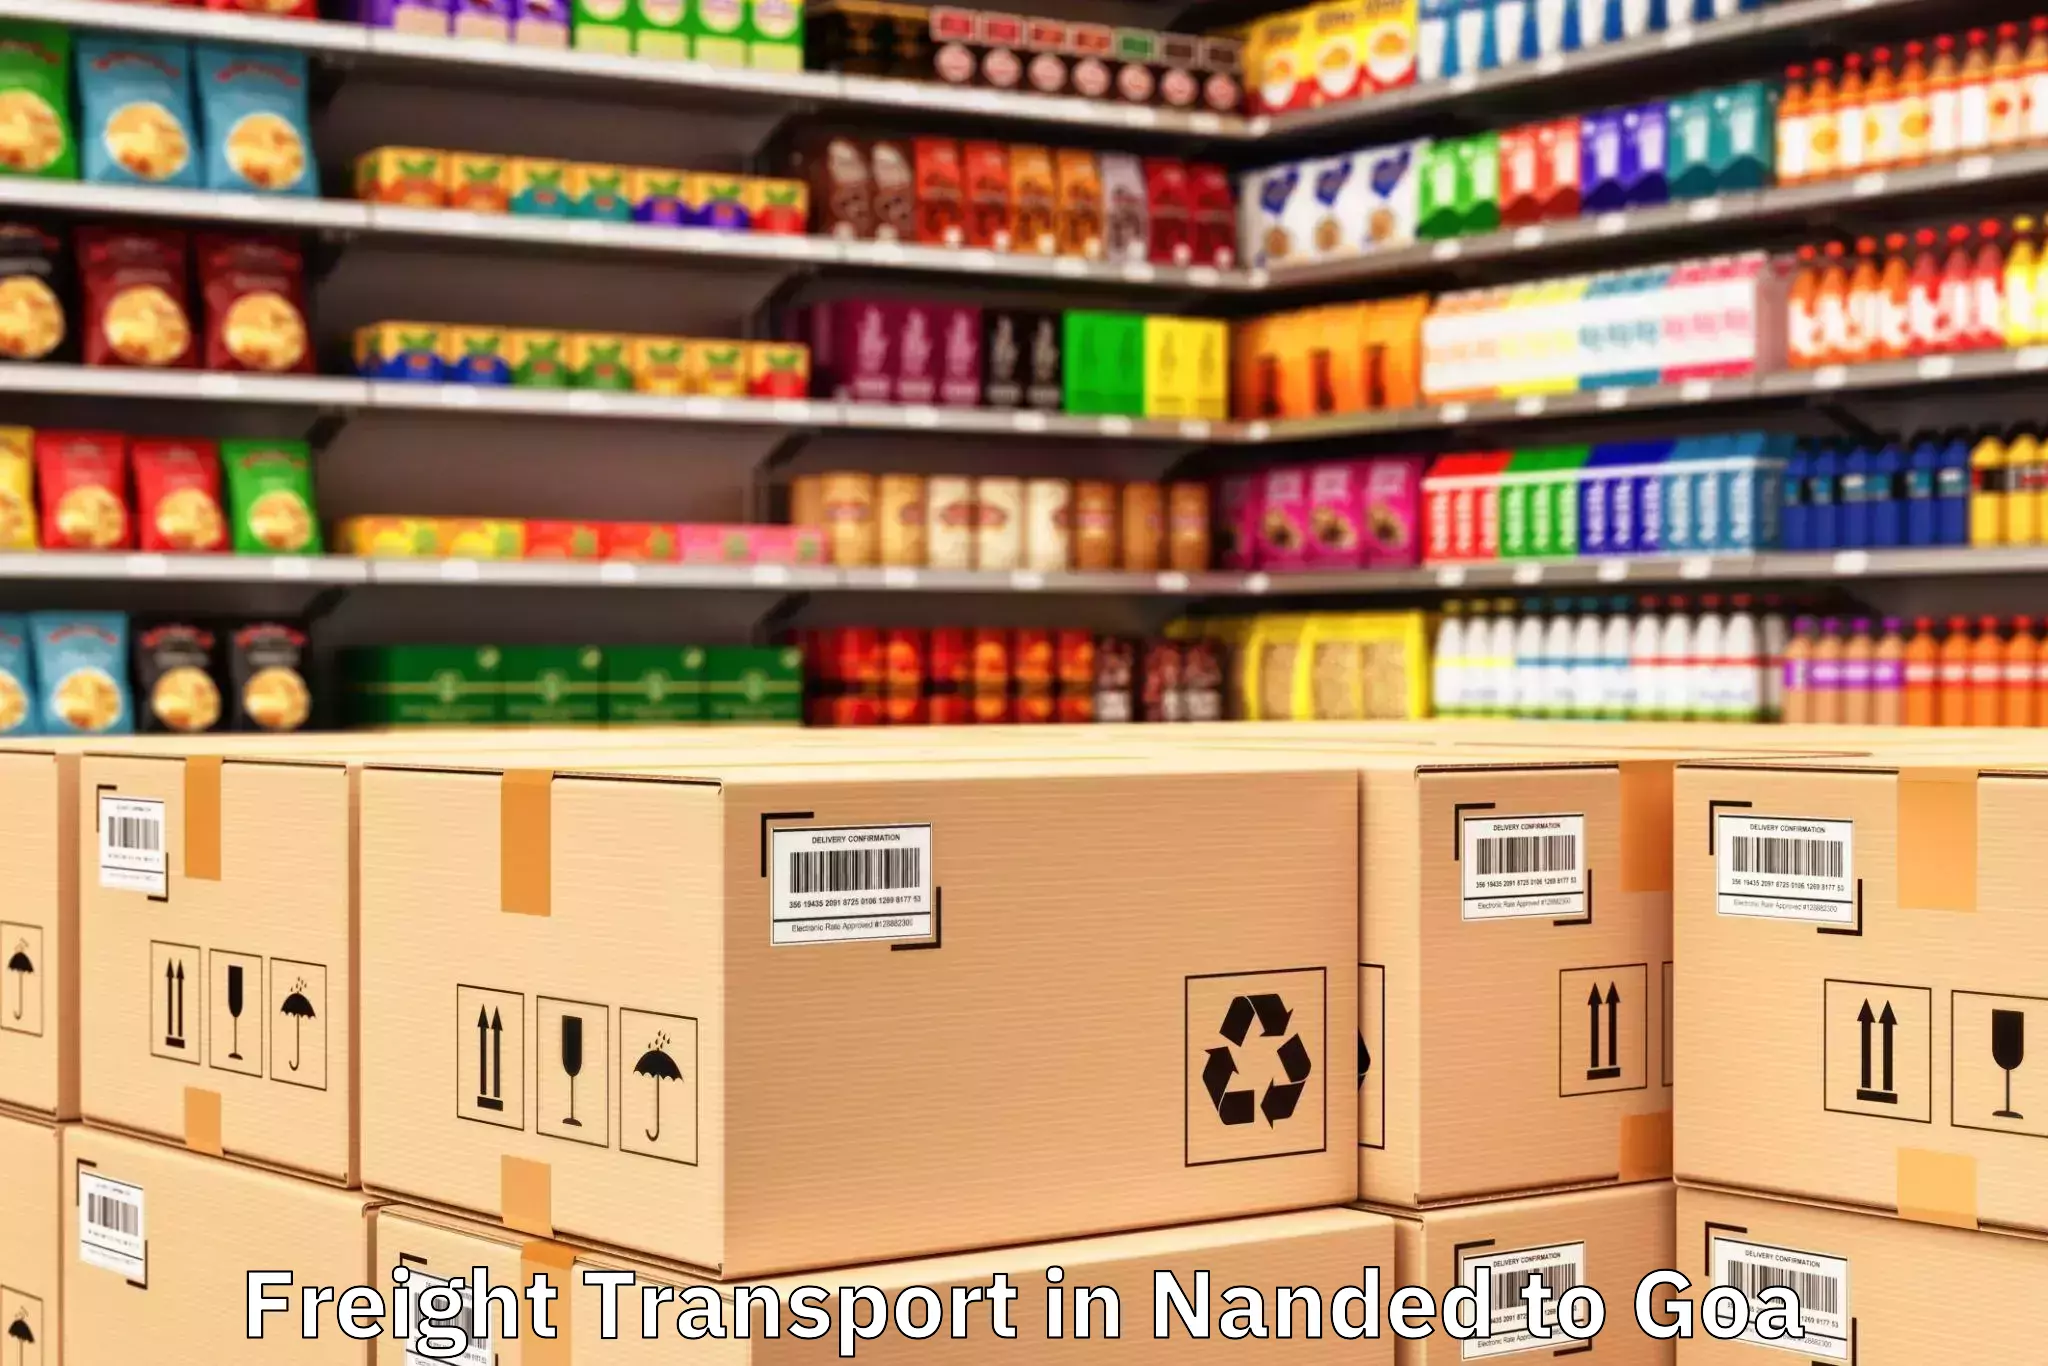 Professional Nanded to Goa Freight Transport